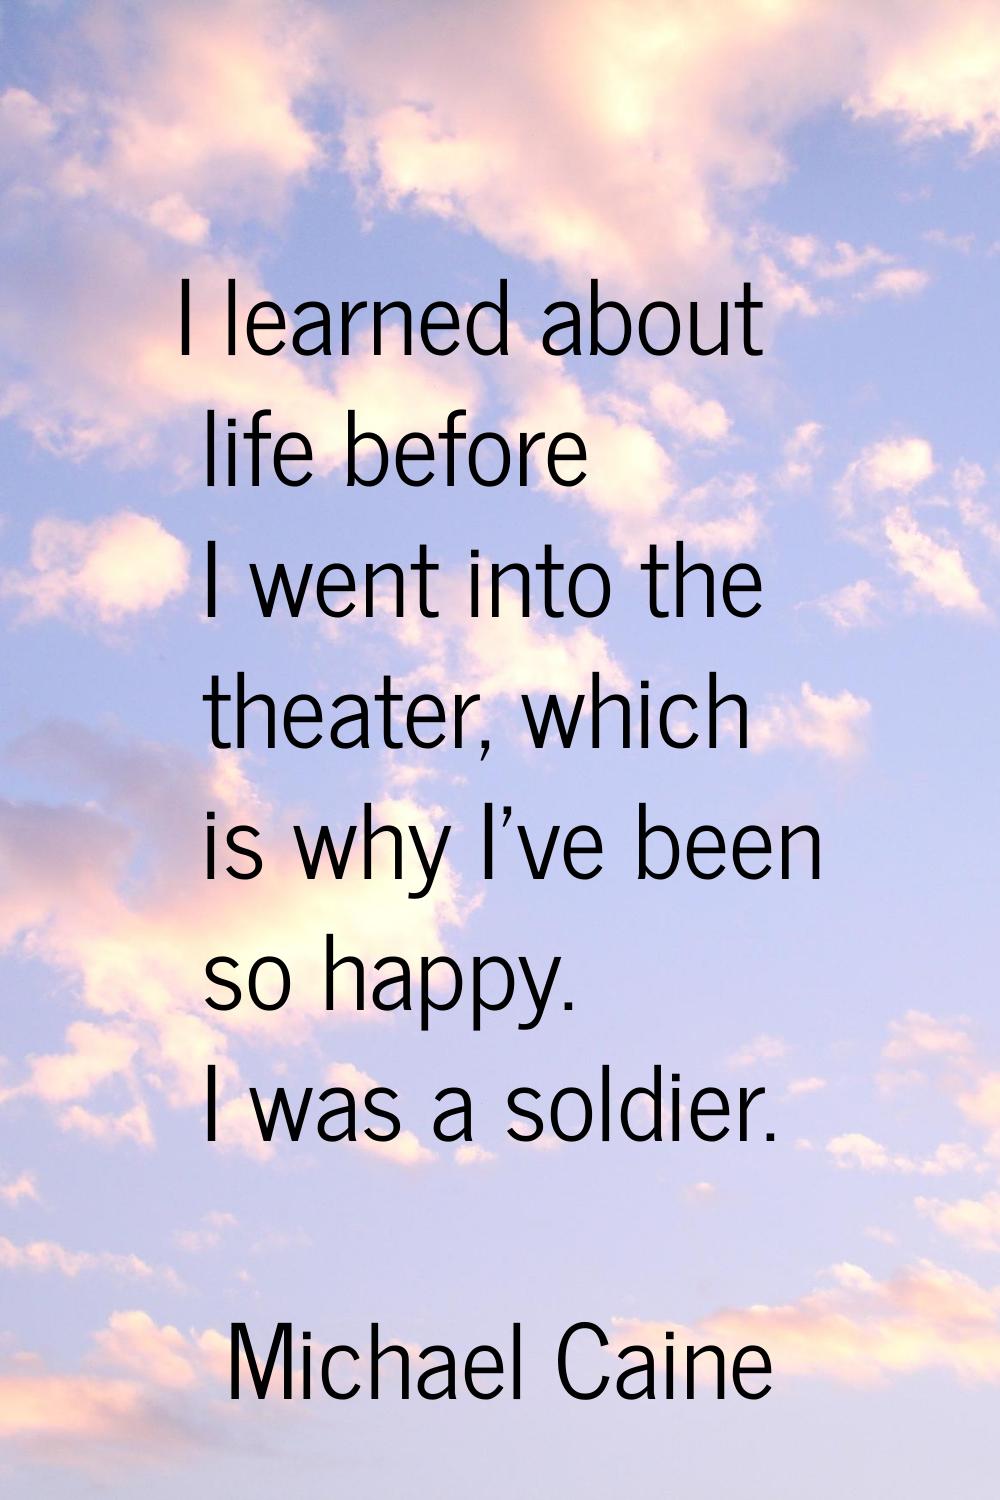 I learned about life before I went into the theater, which is why I've been so happy. I was a soldi